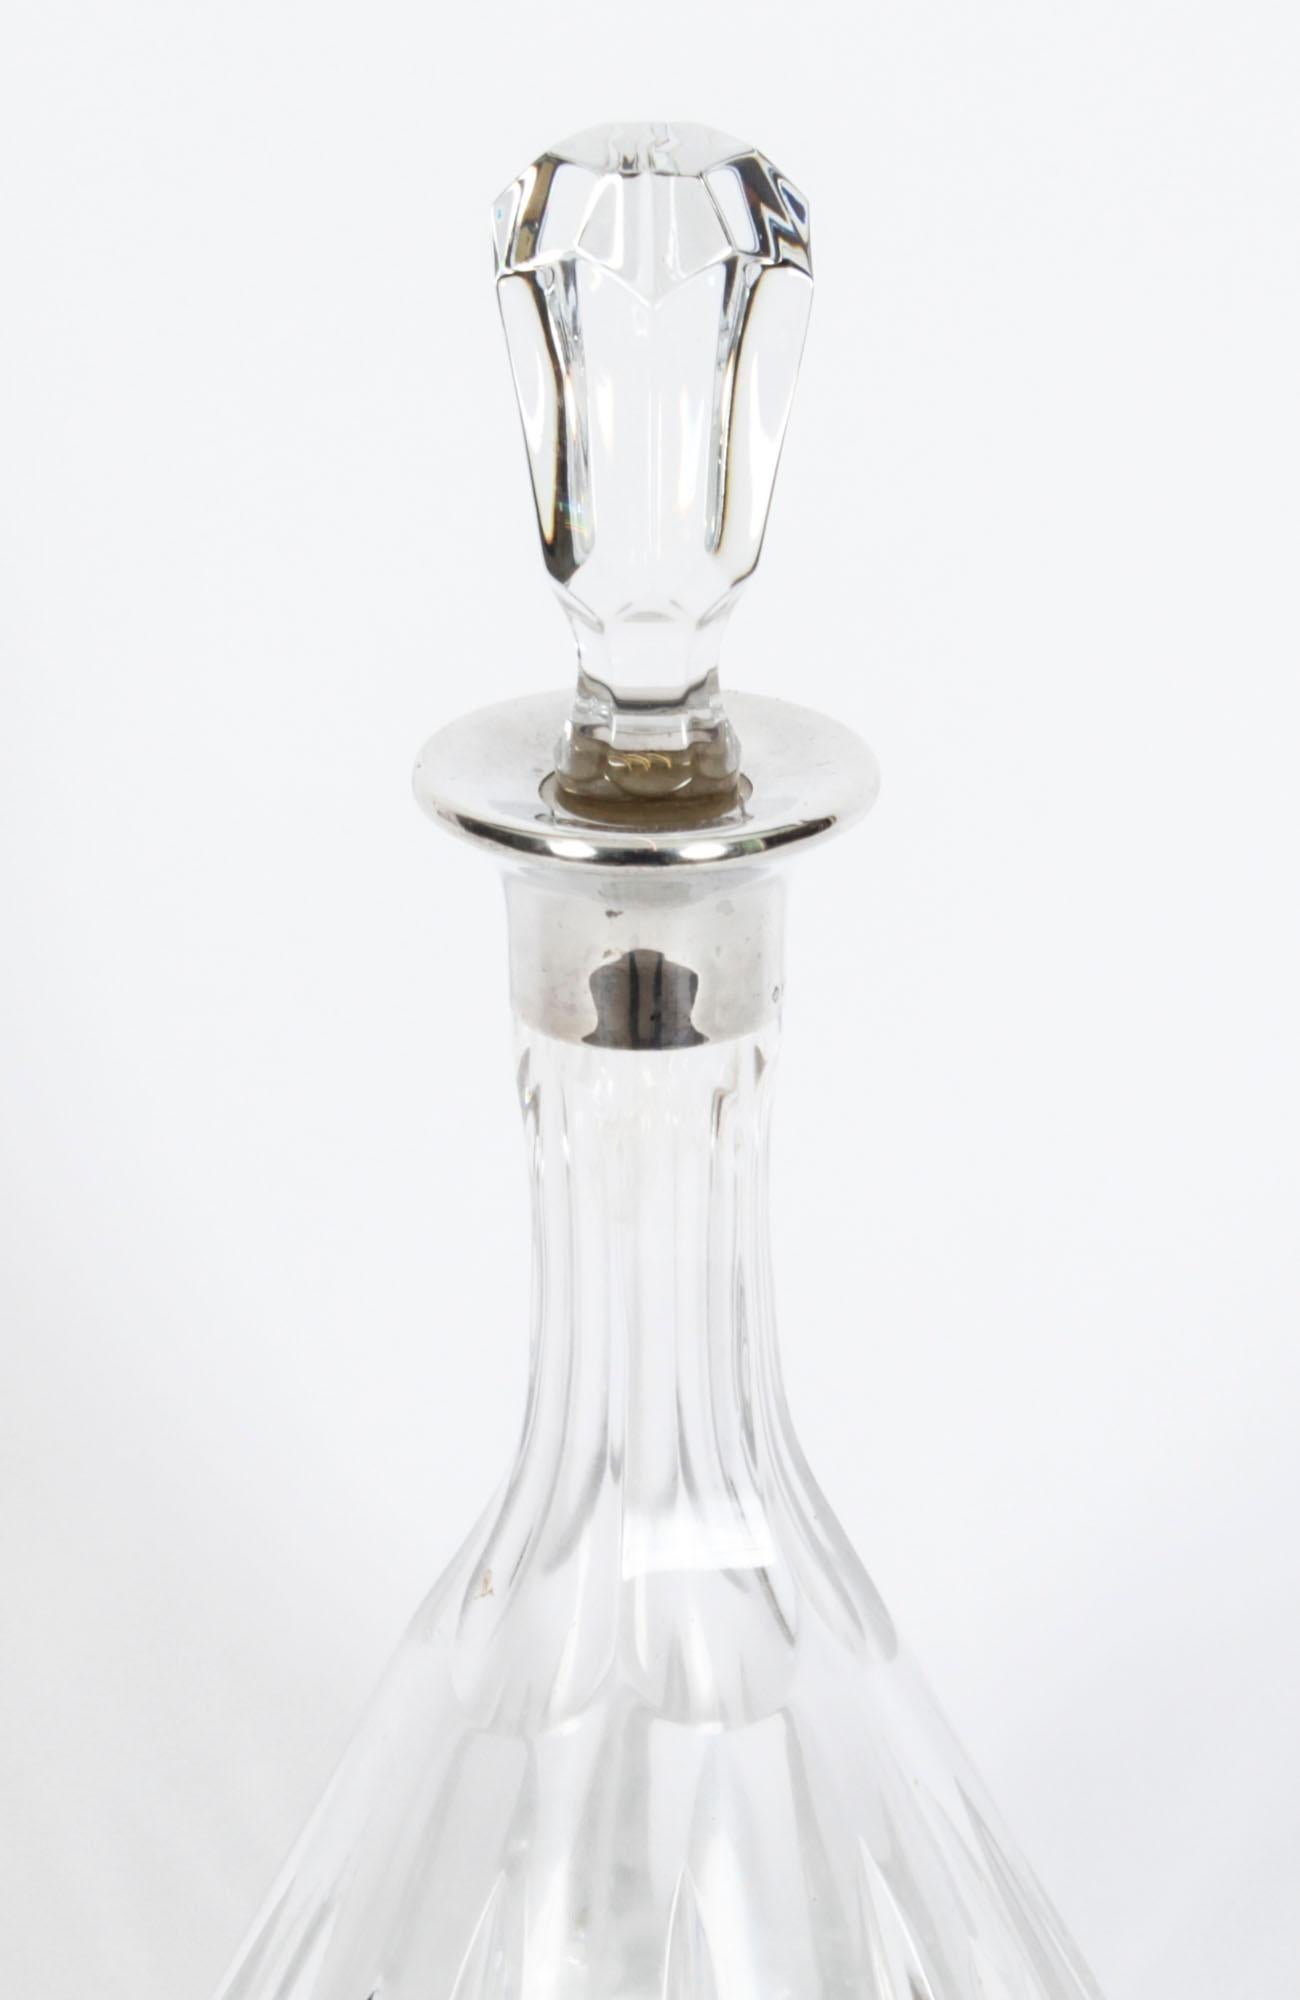 This is a lovely vintage cut glass and sterling Silver collared wine decanter by the renowned retailer Asprey, London, with date mark for 1983 and the makers mark of Asprey.

The heavy set decanter features a deep cut vertical faceted pattern with